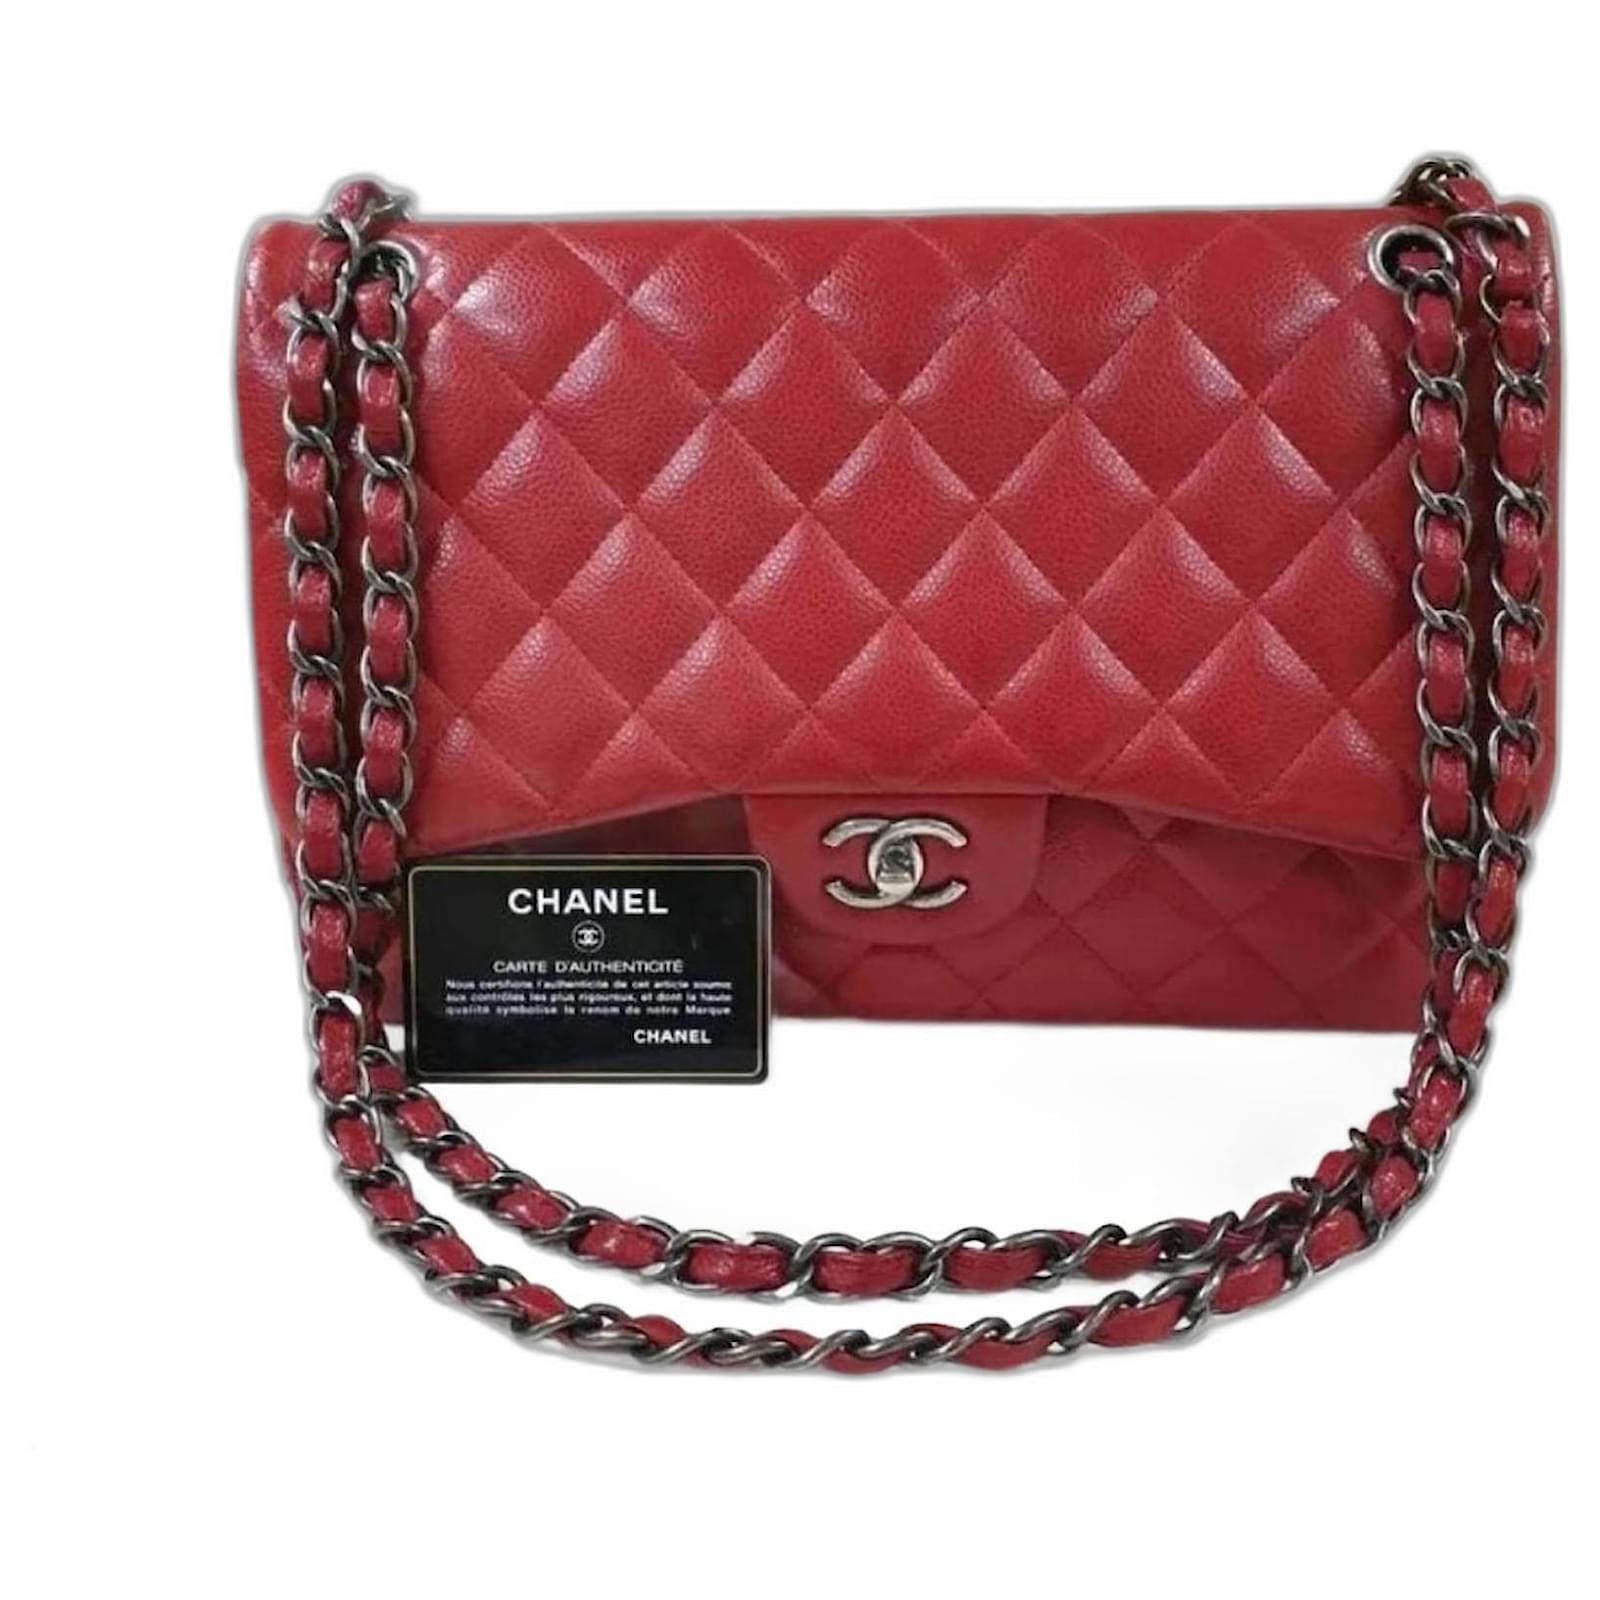 Handbags Chanel Chanel Timeless Red Large Lined Flap Caviar Crossbody Shoulder Bag